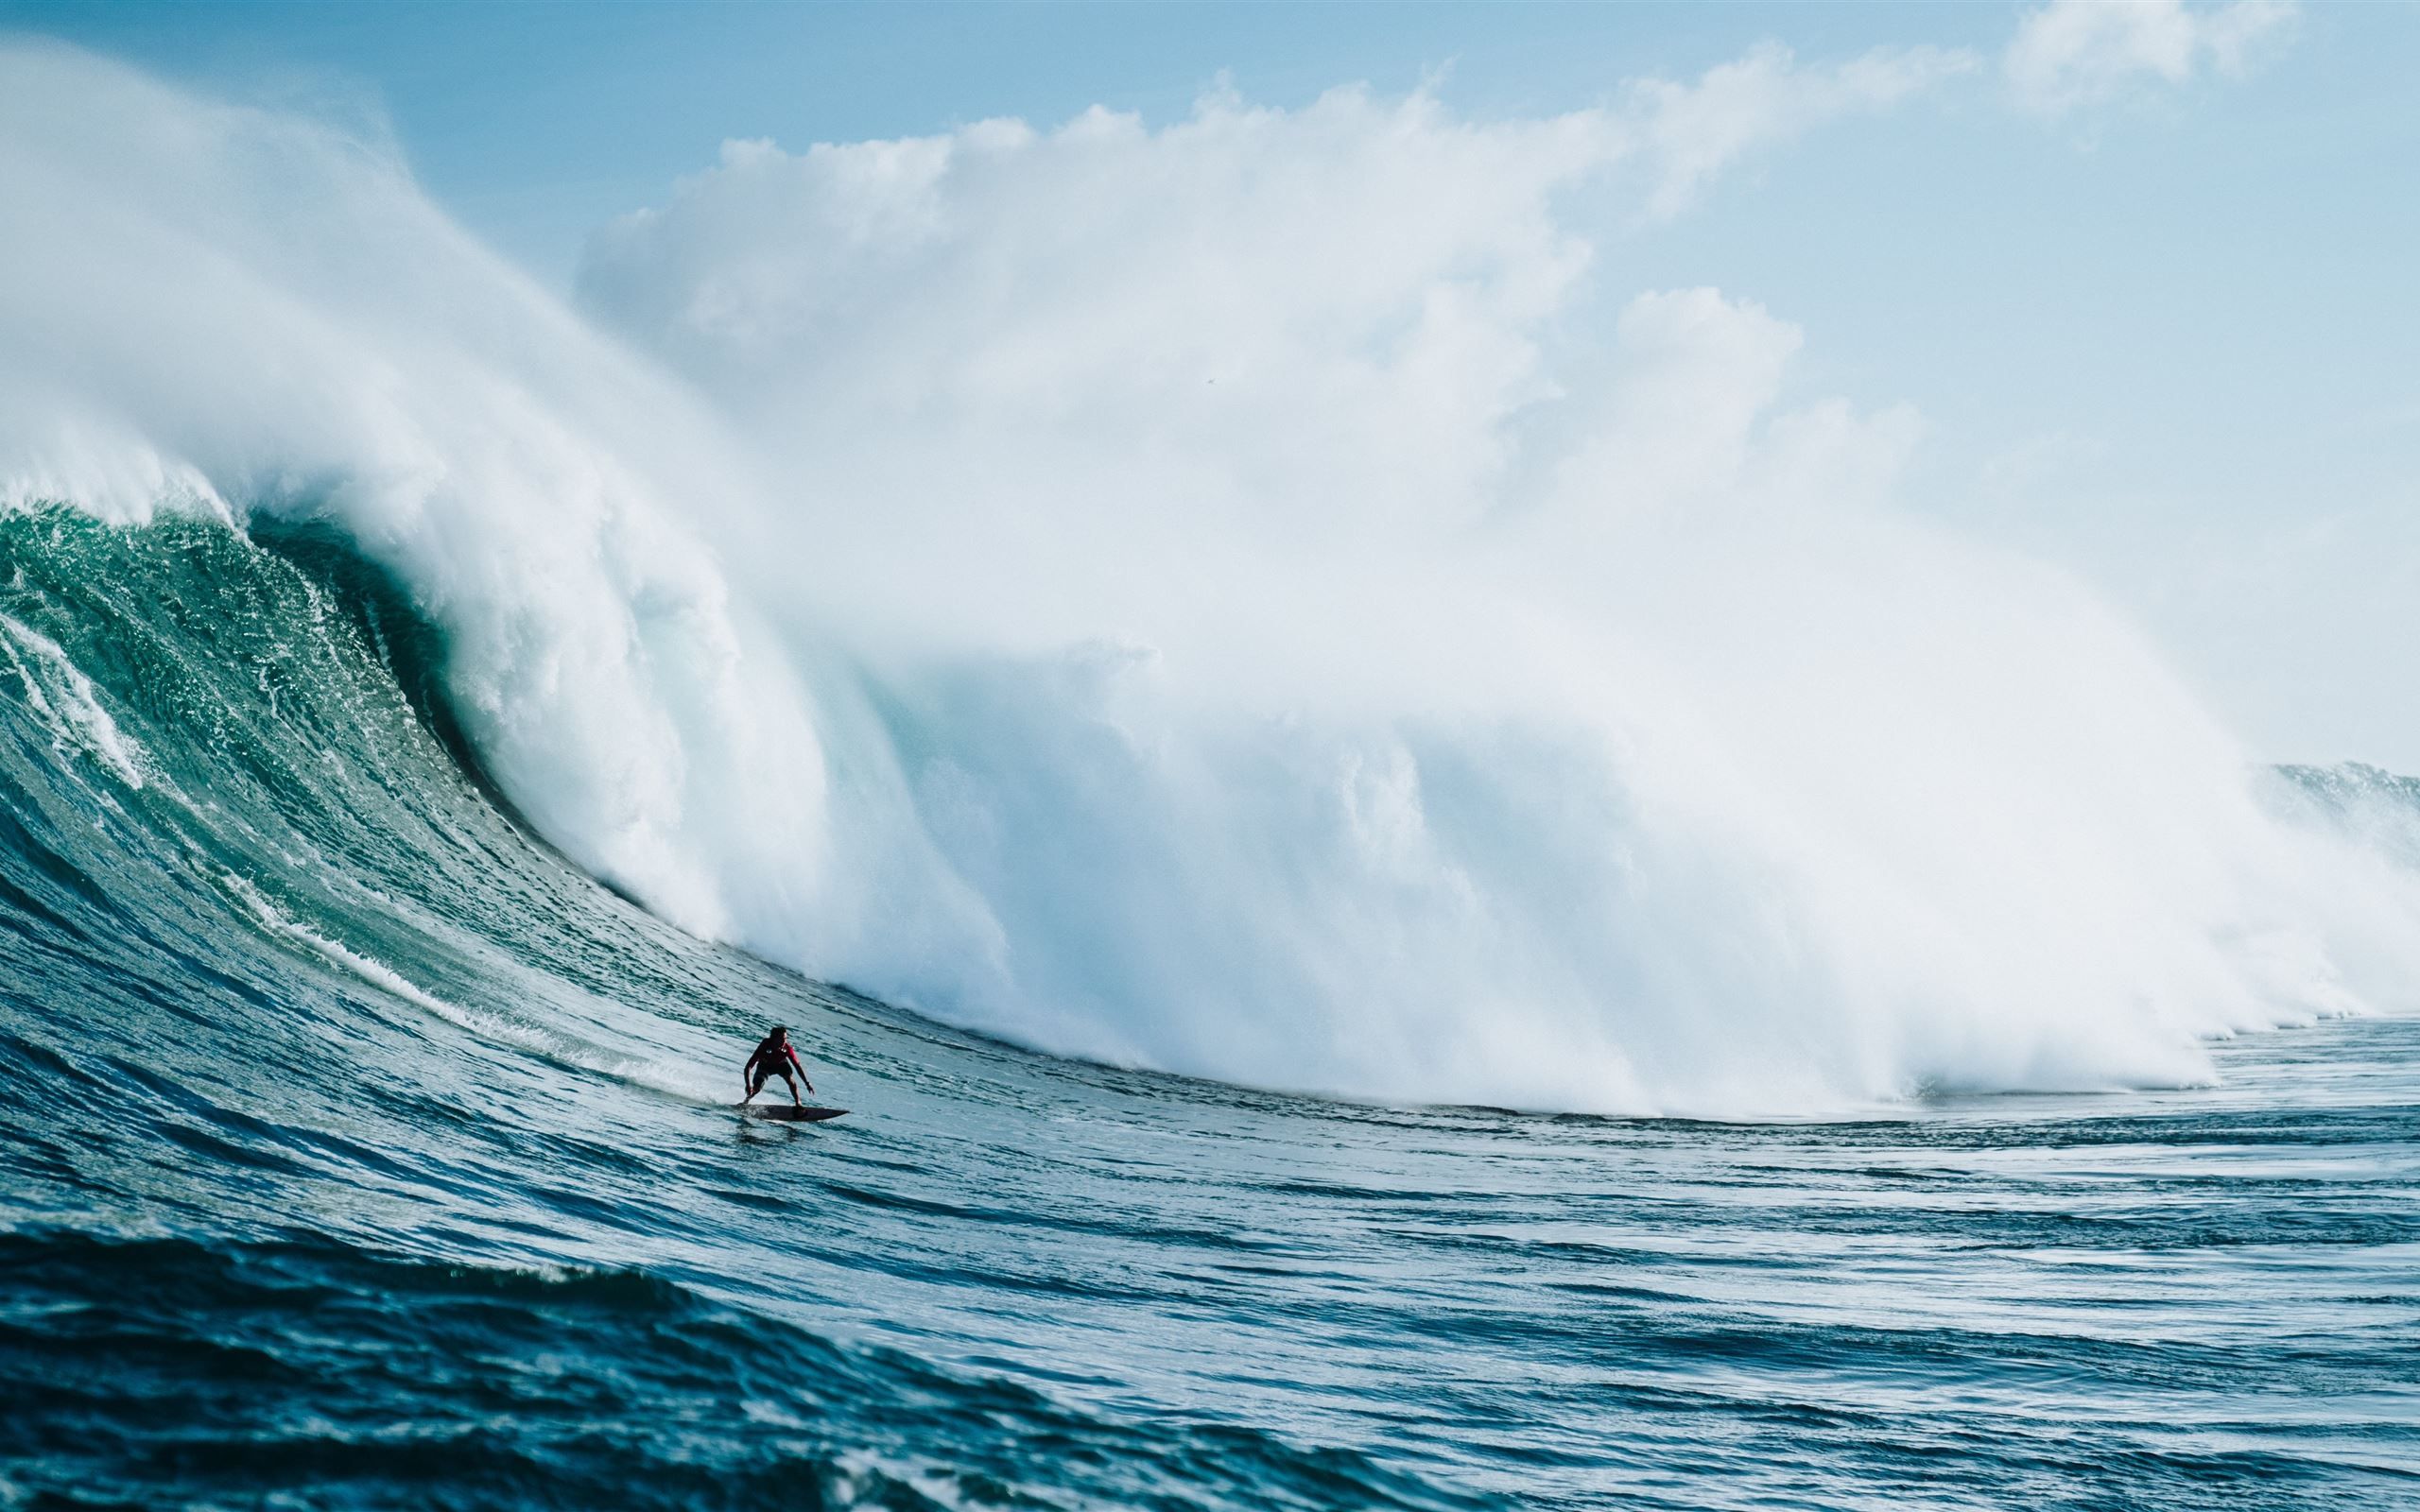 person riding on surfboard with waves behind iMac Wallpaper Download